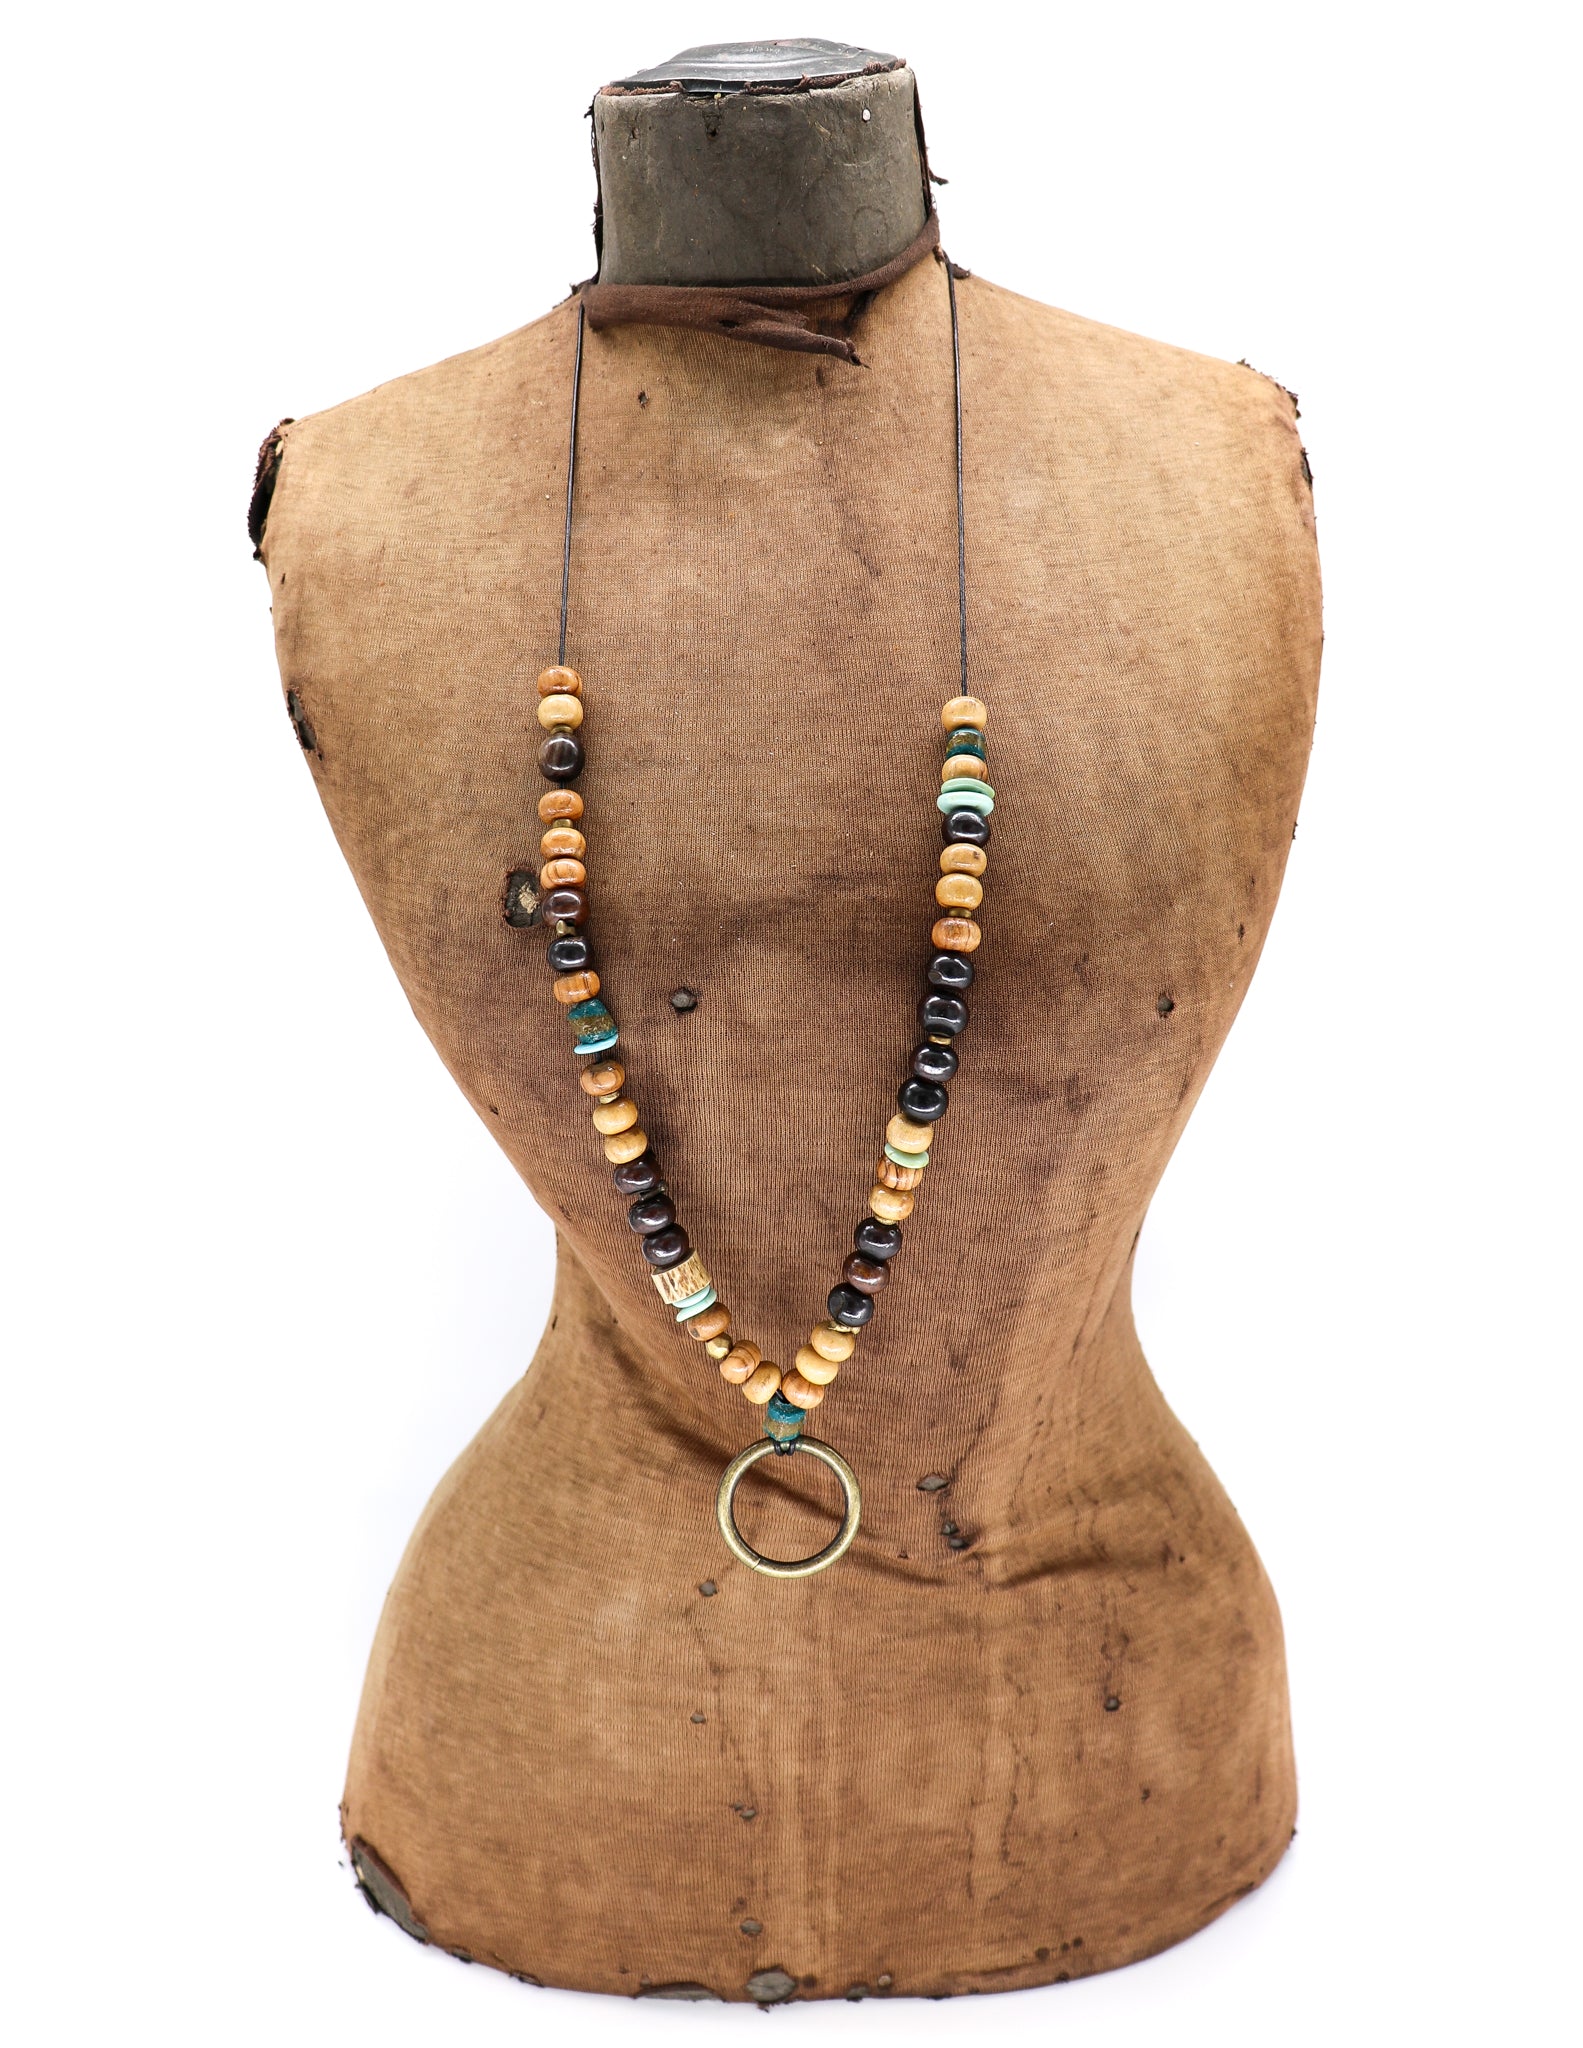 African Trade Beads Necklace – Second Sunrise